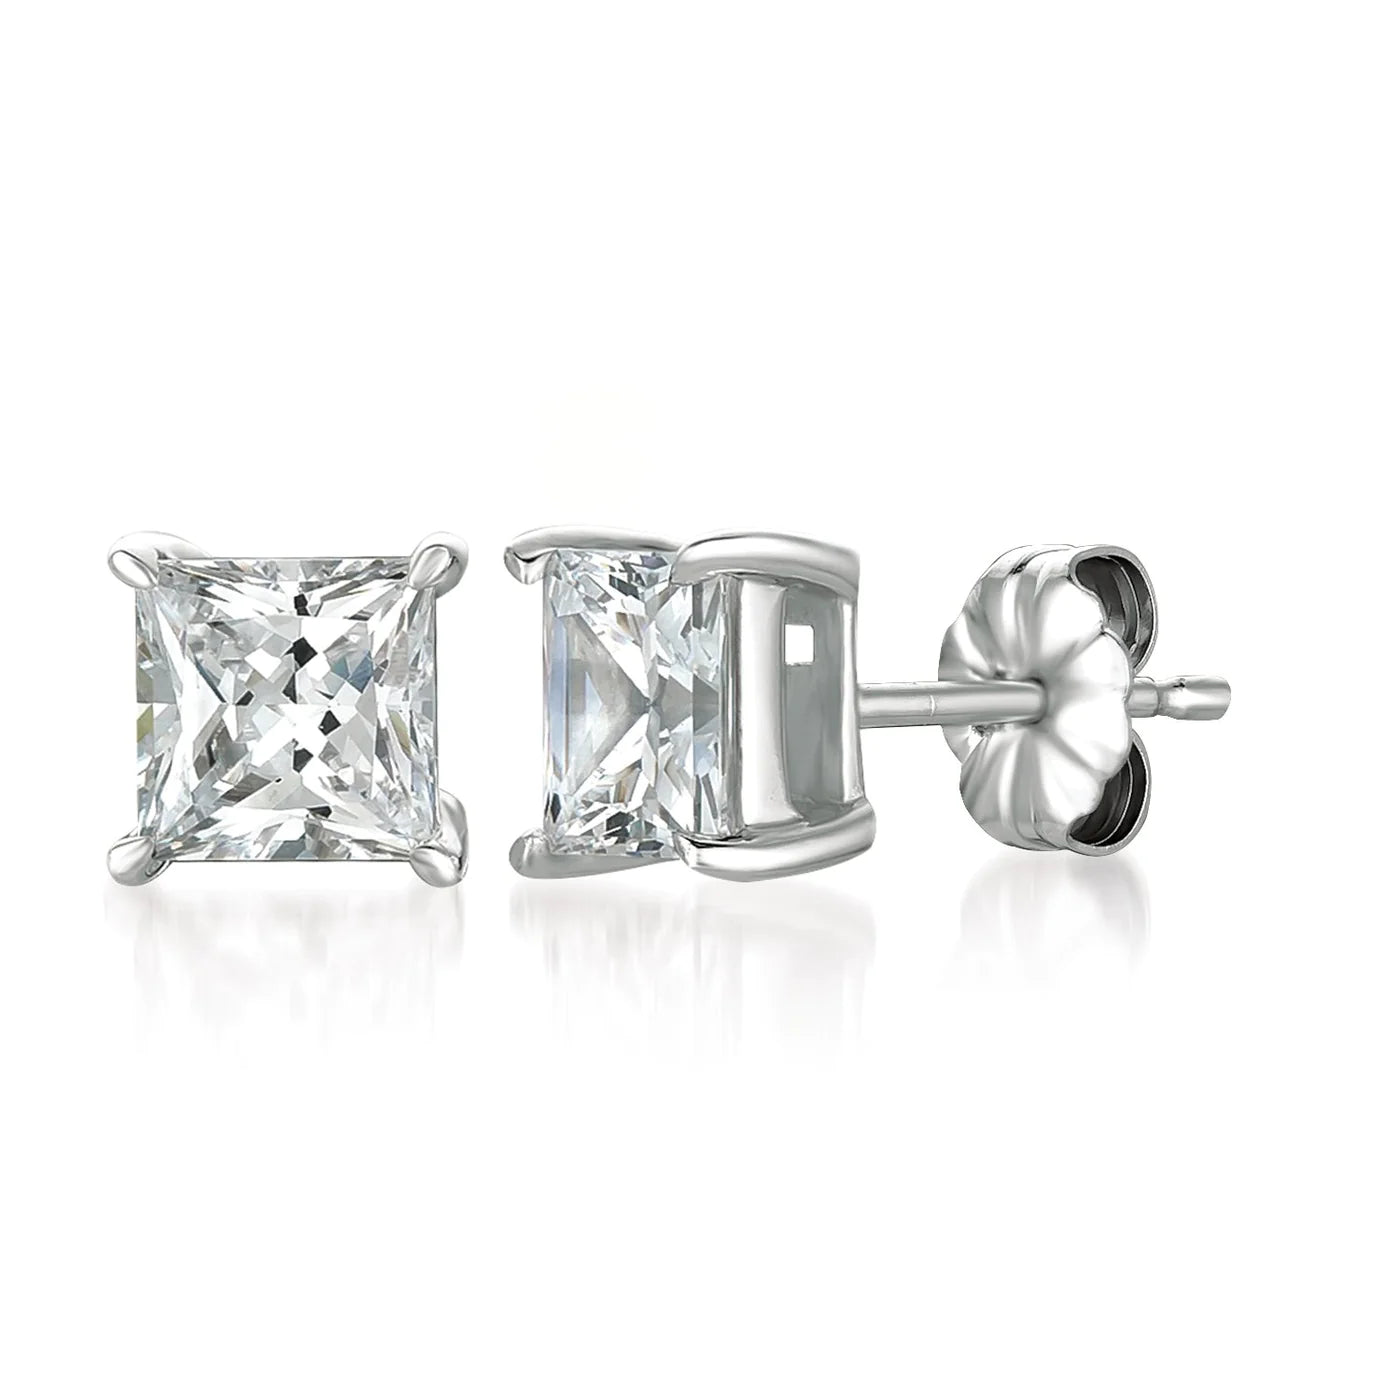 Solitaire Princess Stud Earrings Finished in Pure Platinum- 3.0 cttw